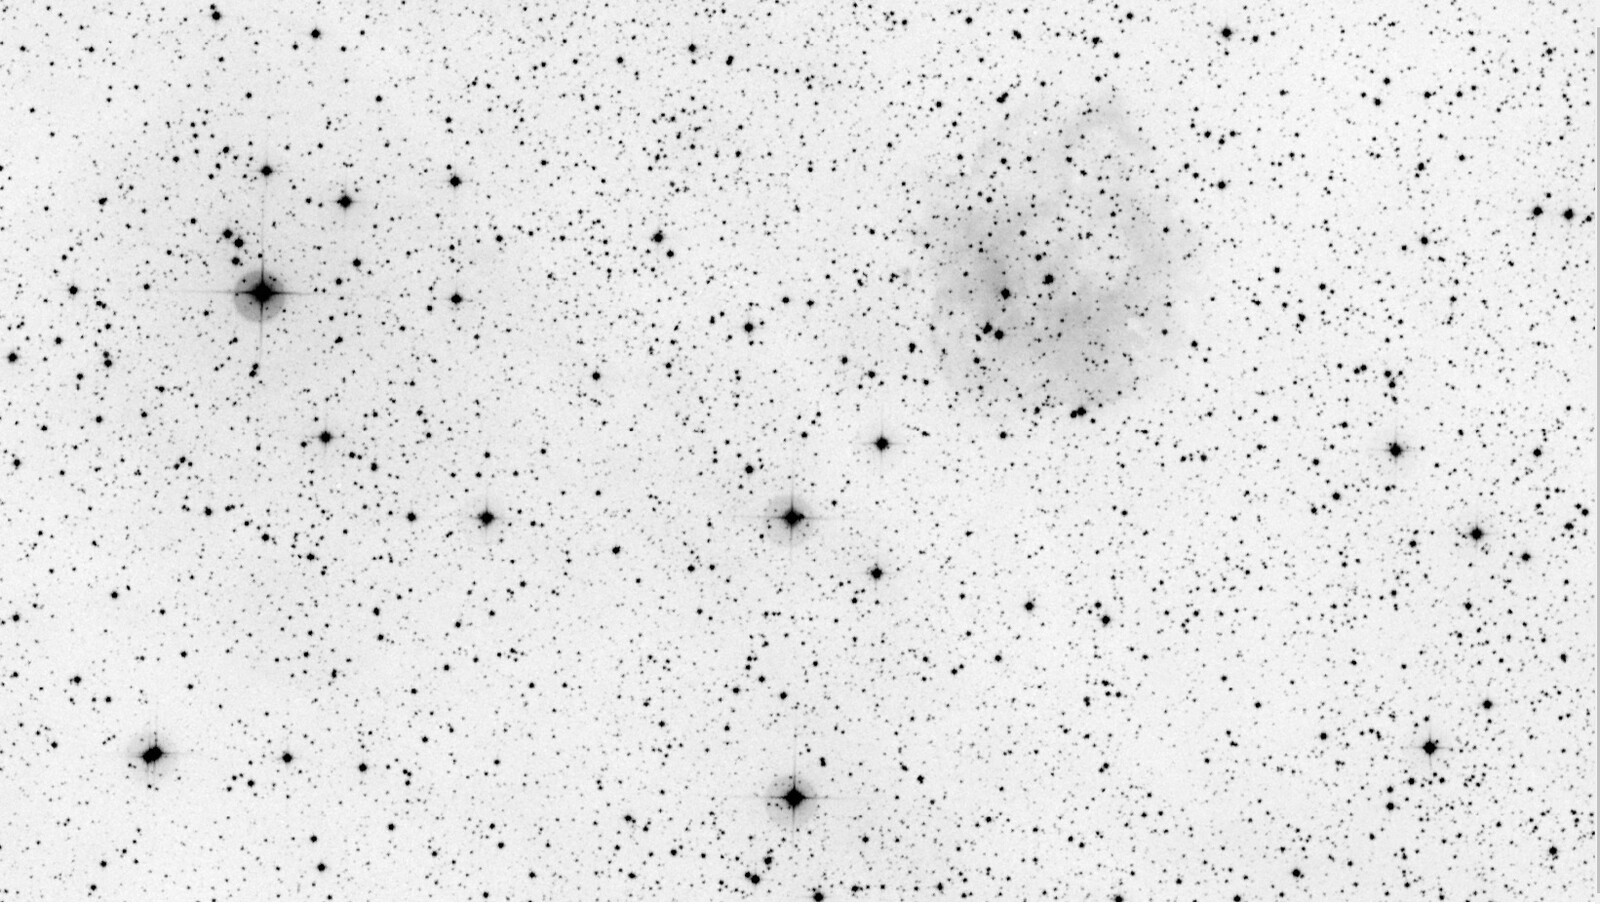 SH2 104 And Do104 Starfield Image